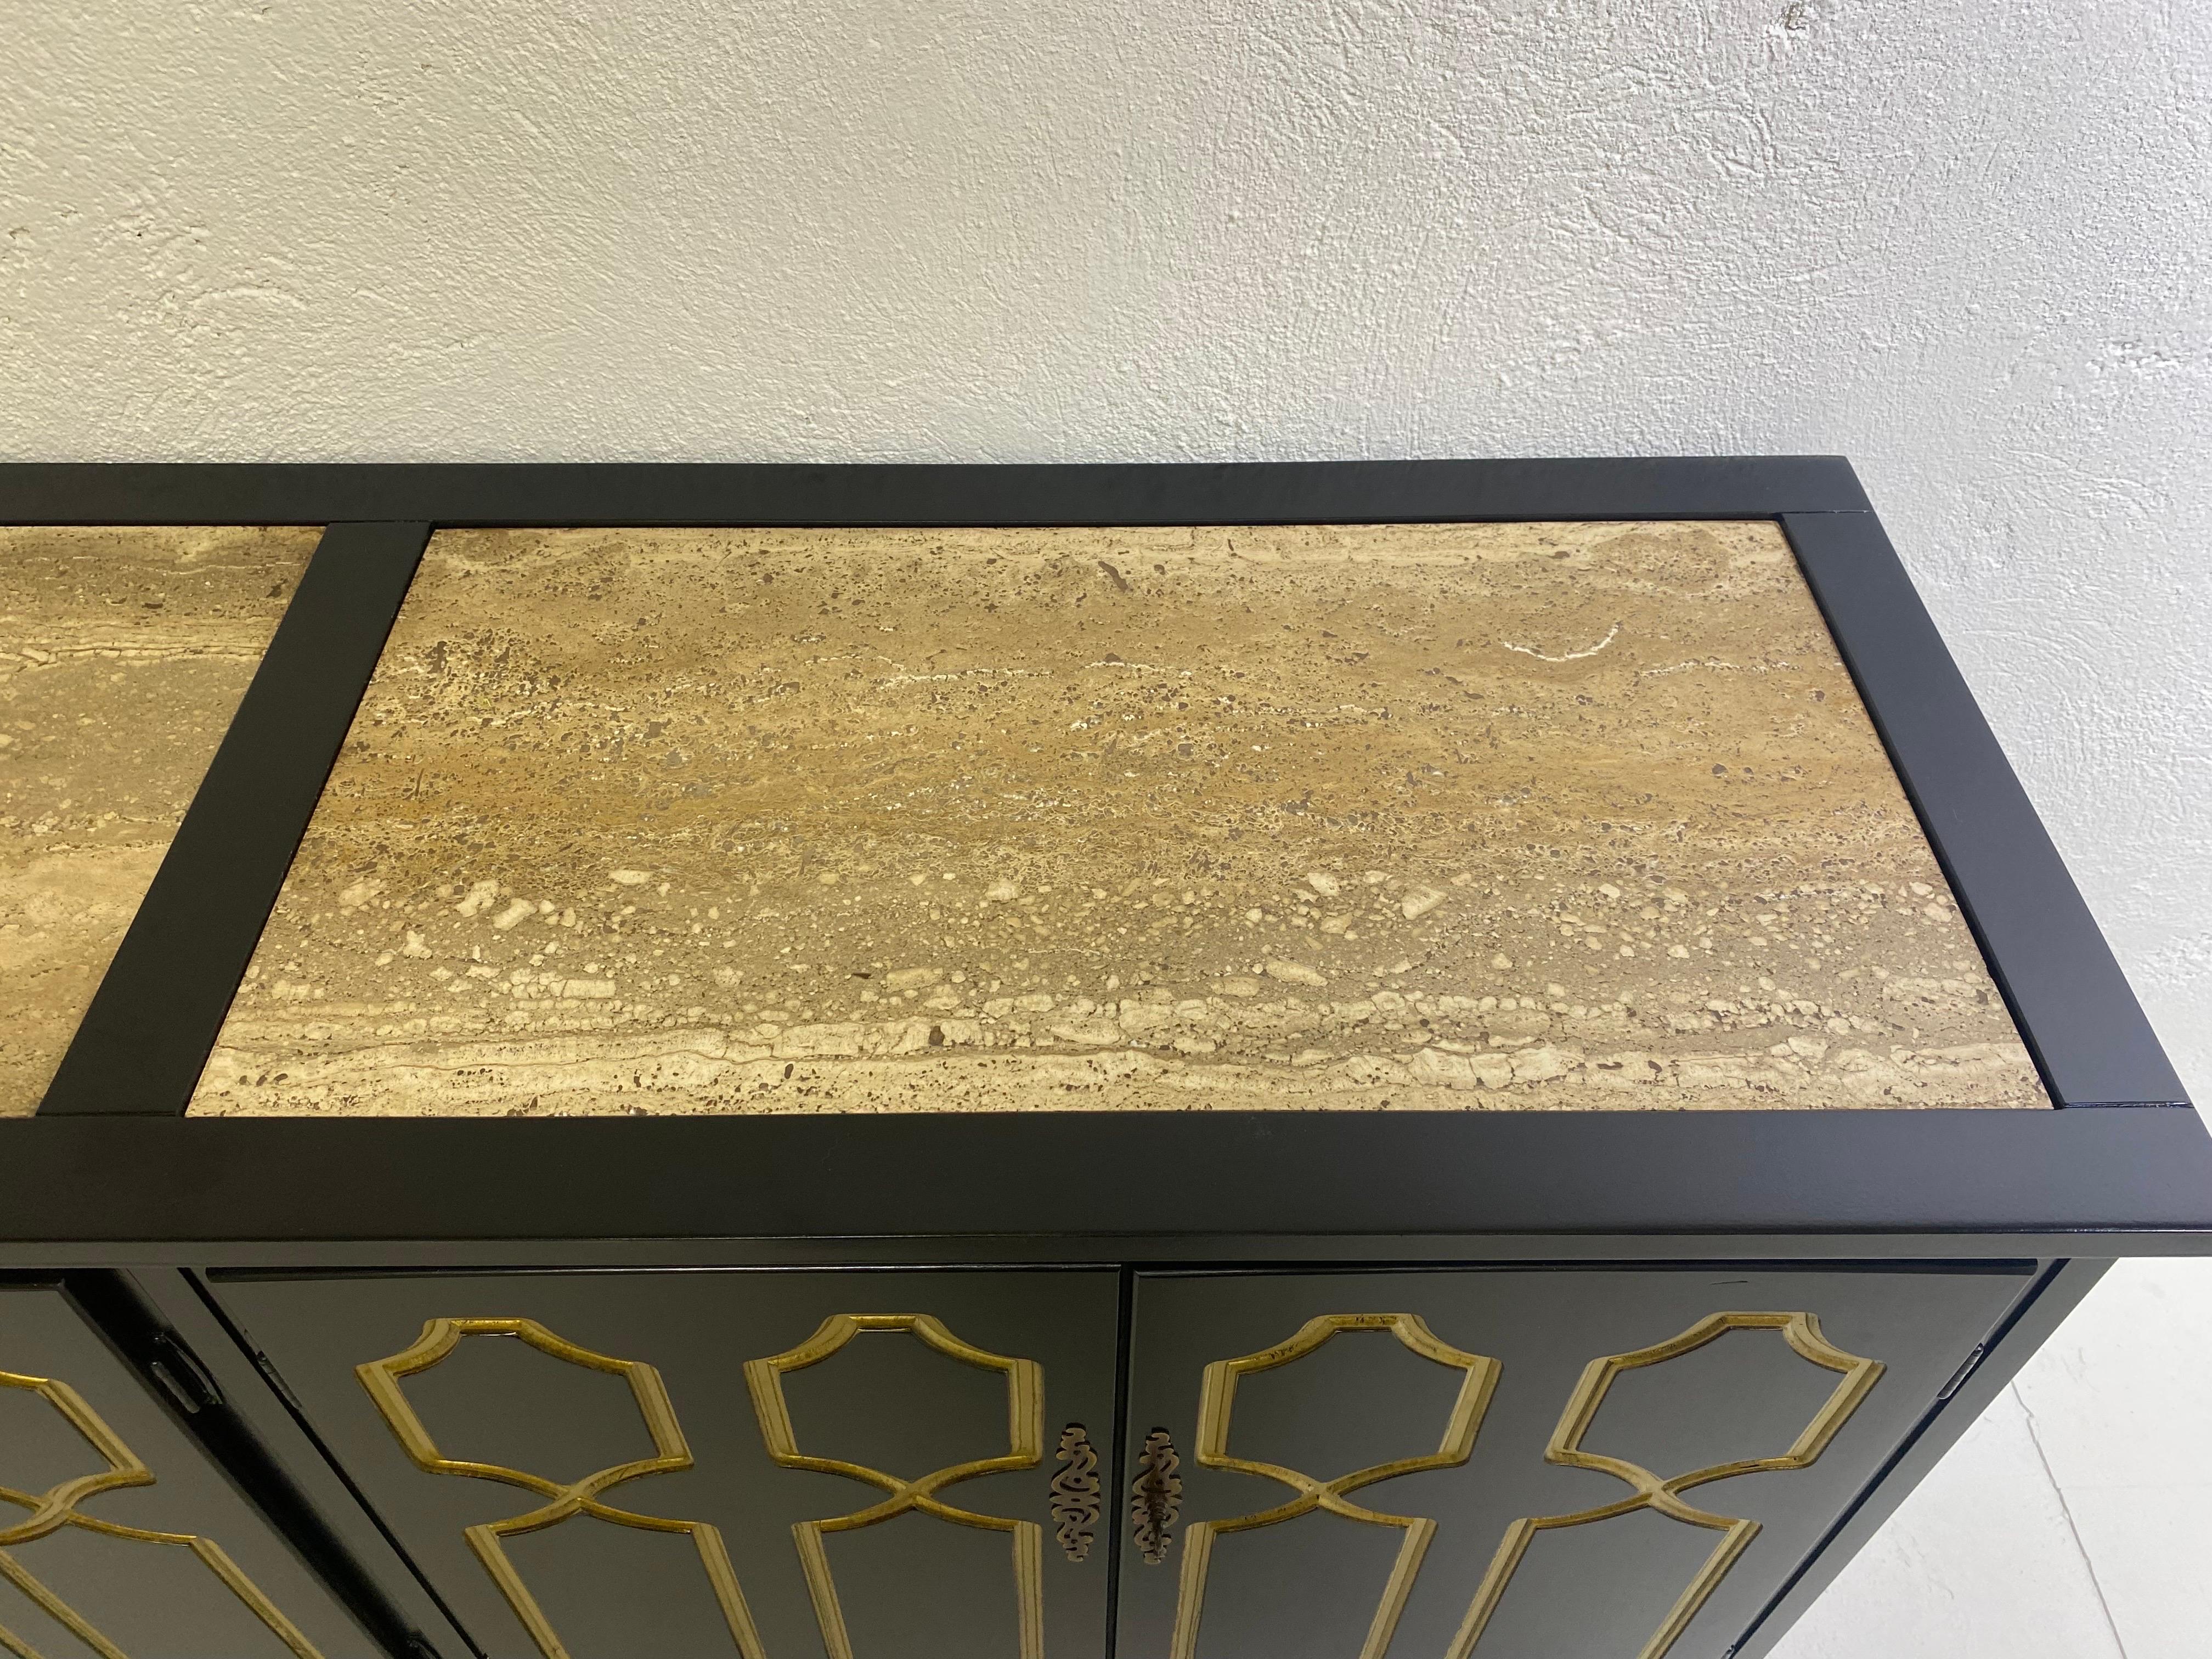 This is a black and gold Hollywood Regency Lacquered Chest buy Henredon and design by Dorothy Draper in the mid-1950s. This credenza has a natural Italian travertine inserted marble top. The credenza has an indented goldleaf design at the front of